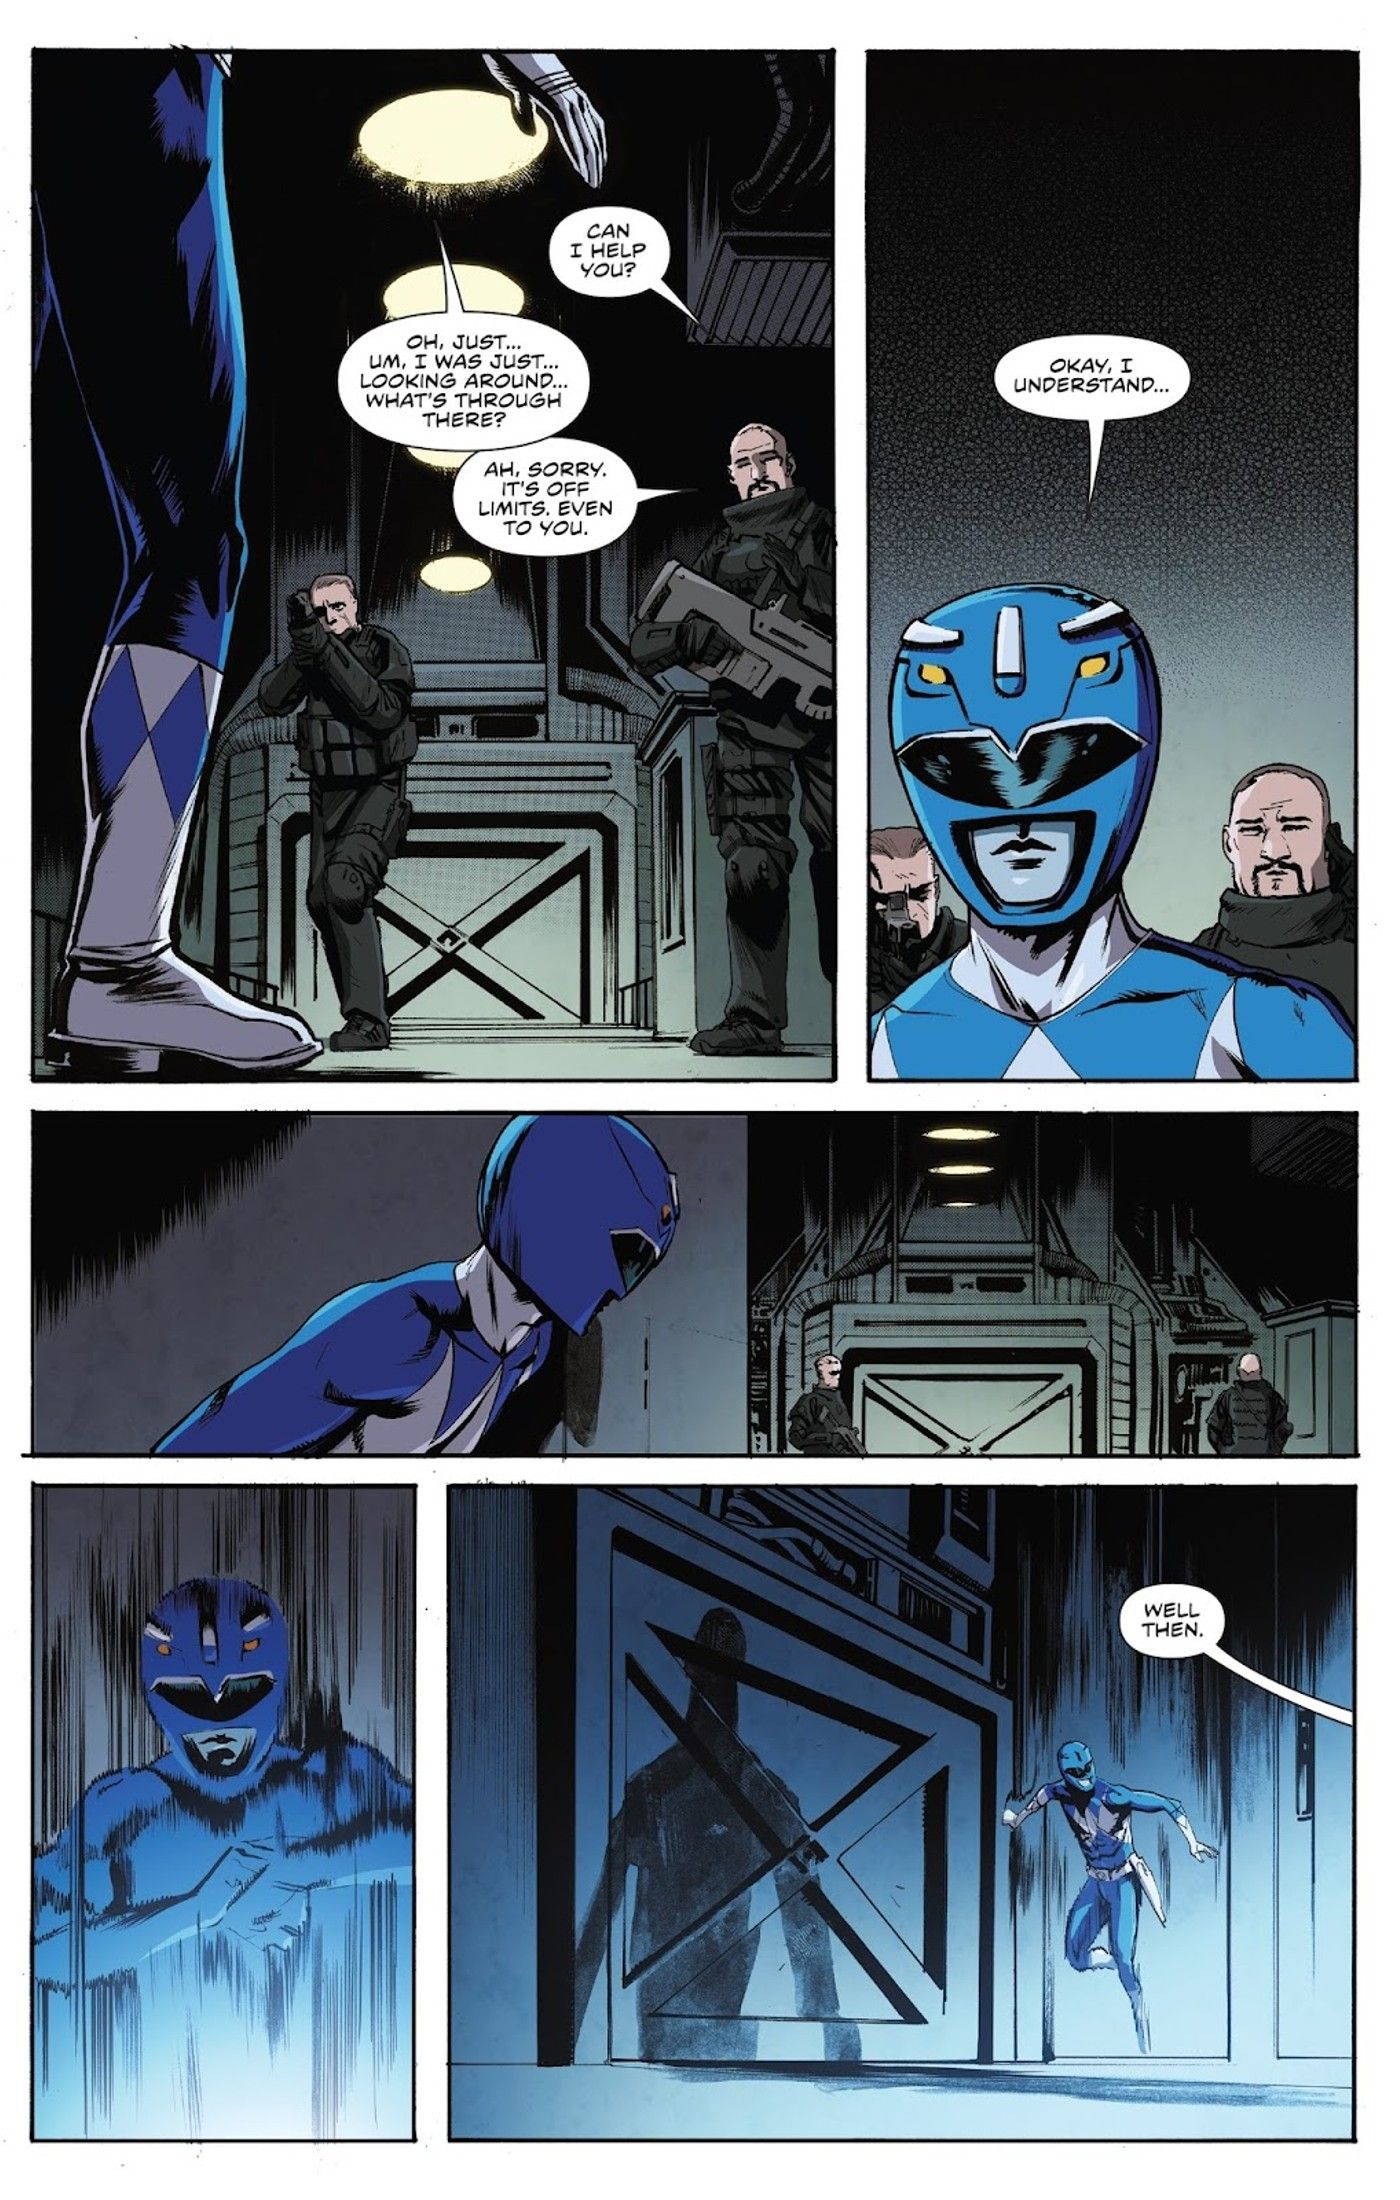 Blue Ranger Billy teleports to find Lord Drakkon at Promethea